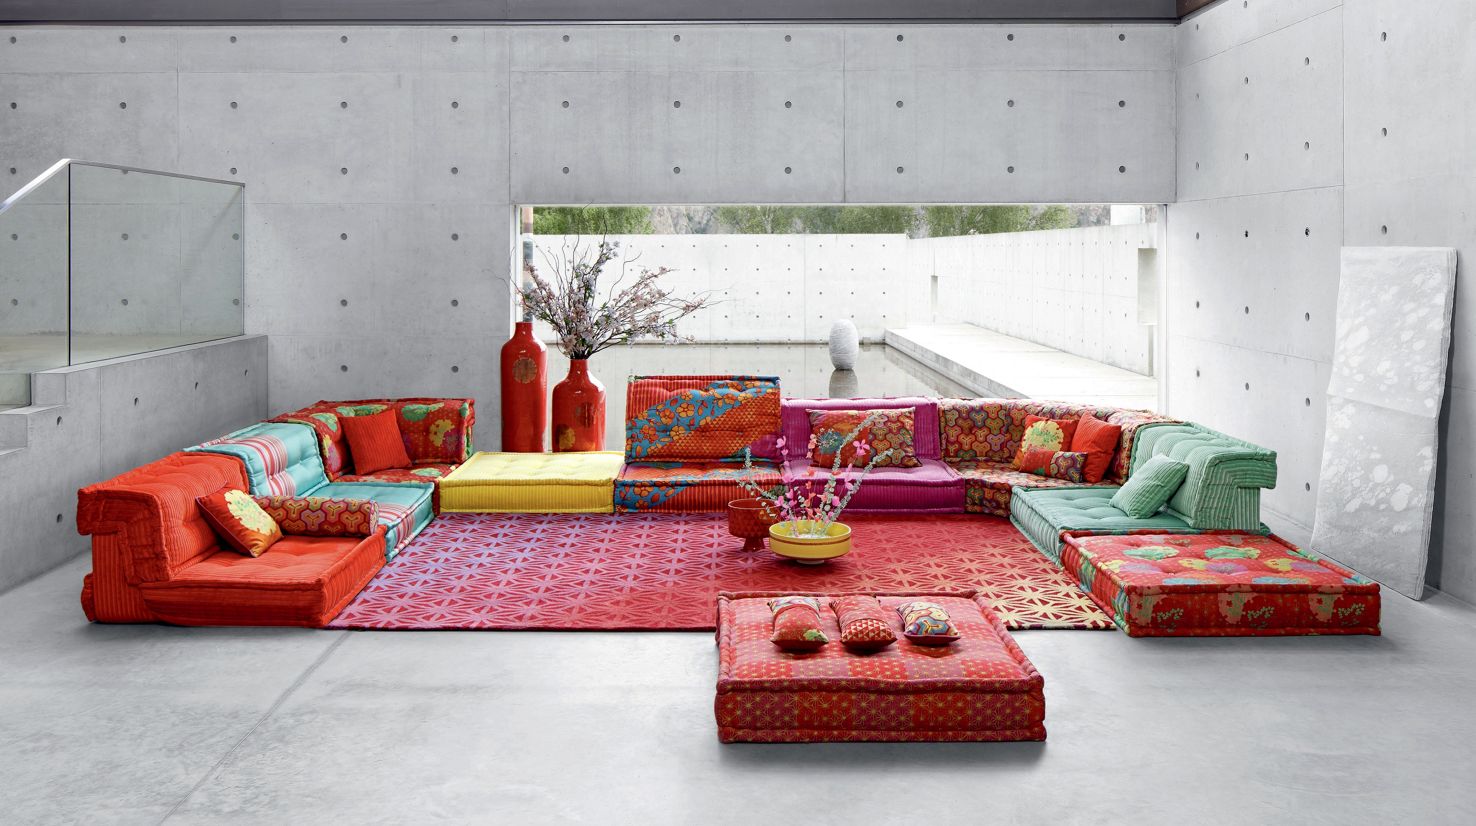 SOFAS SOFA BEDS All Roche Bobois Products